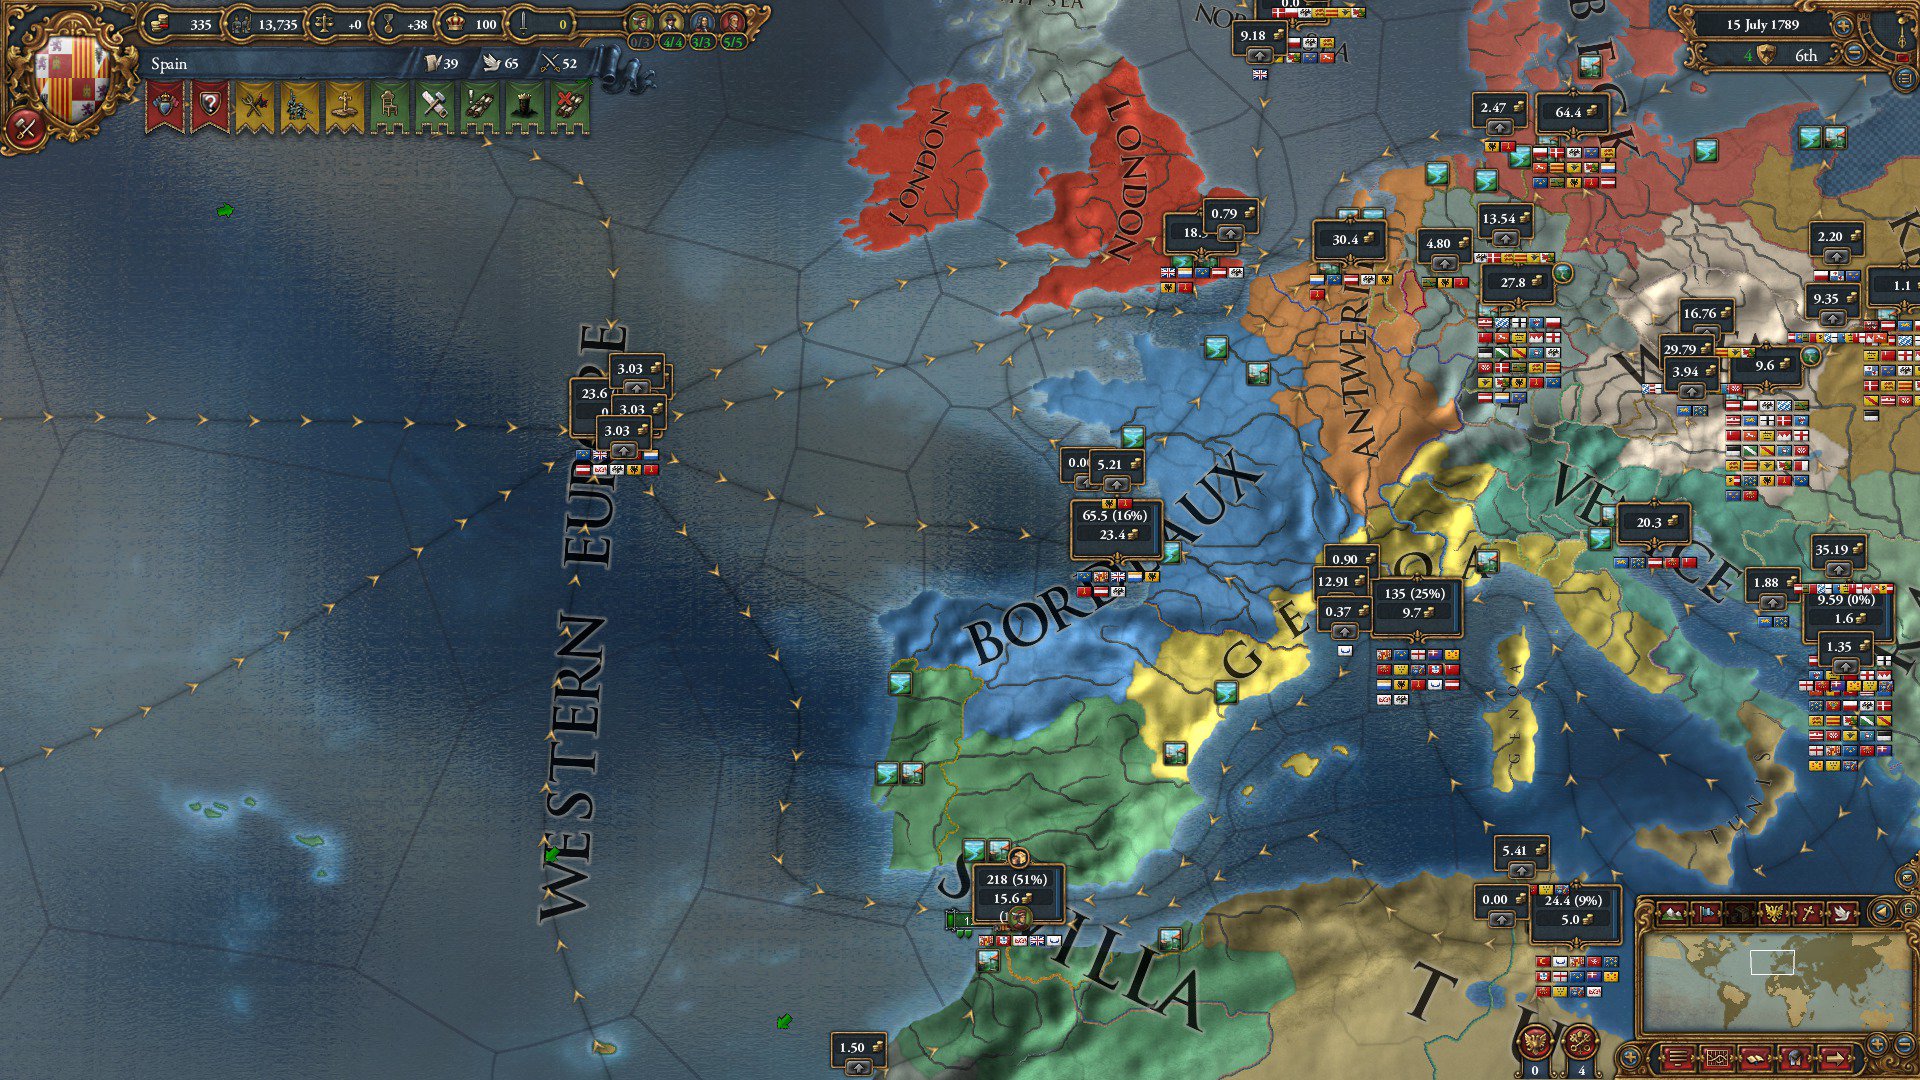 Europa Universalis IV Wealth of Nations 6